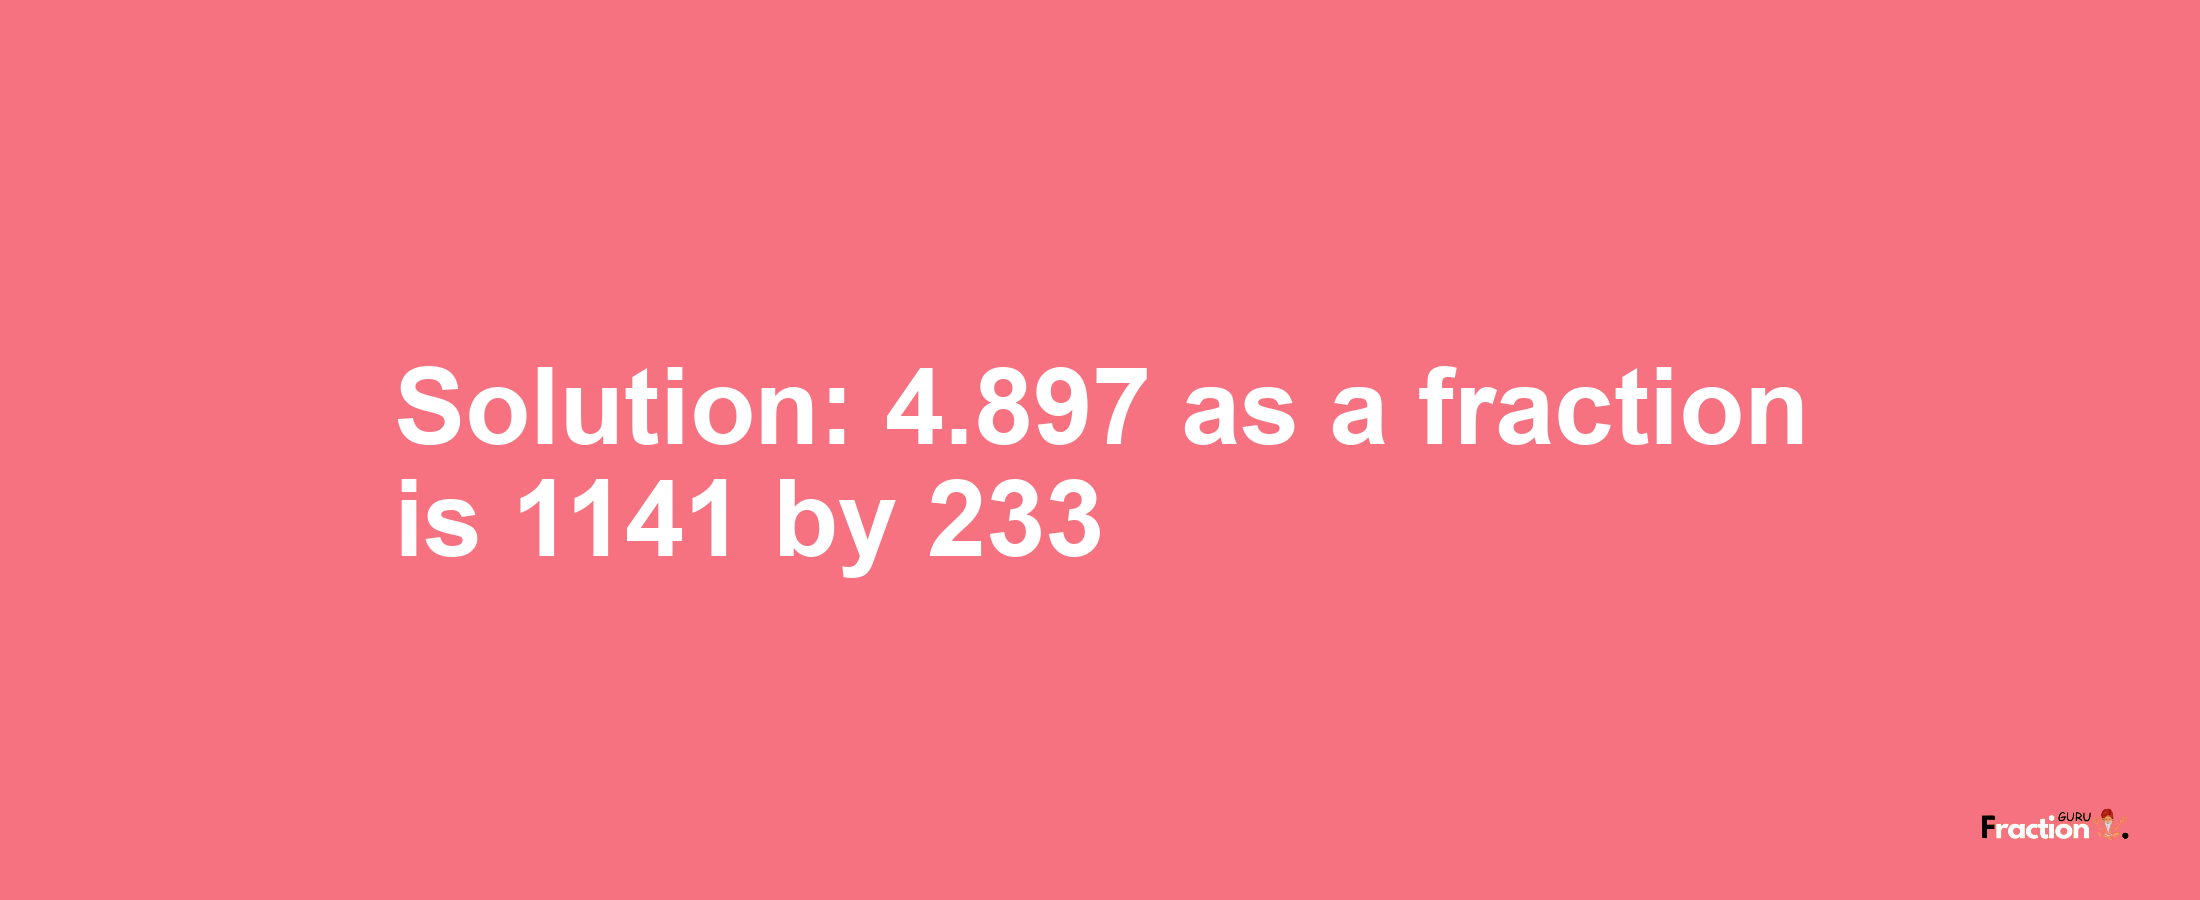 Solution:4.897 as a fraction is 1141/233